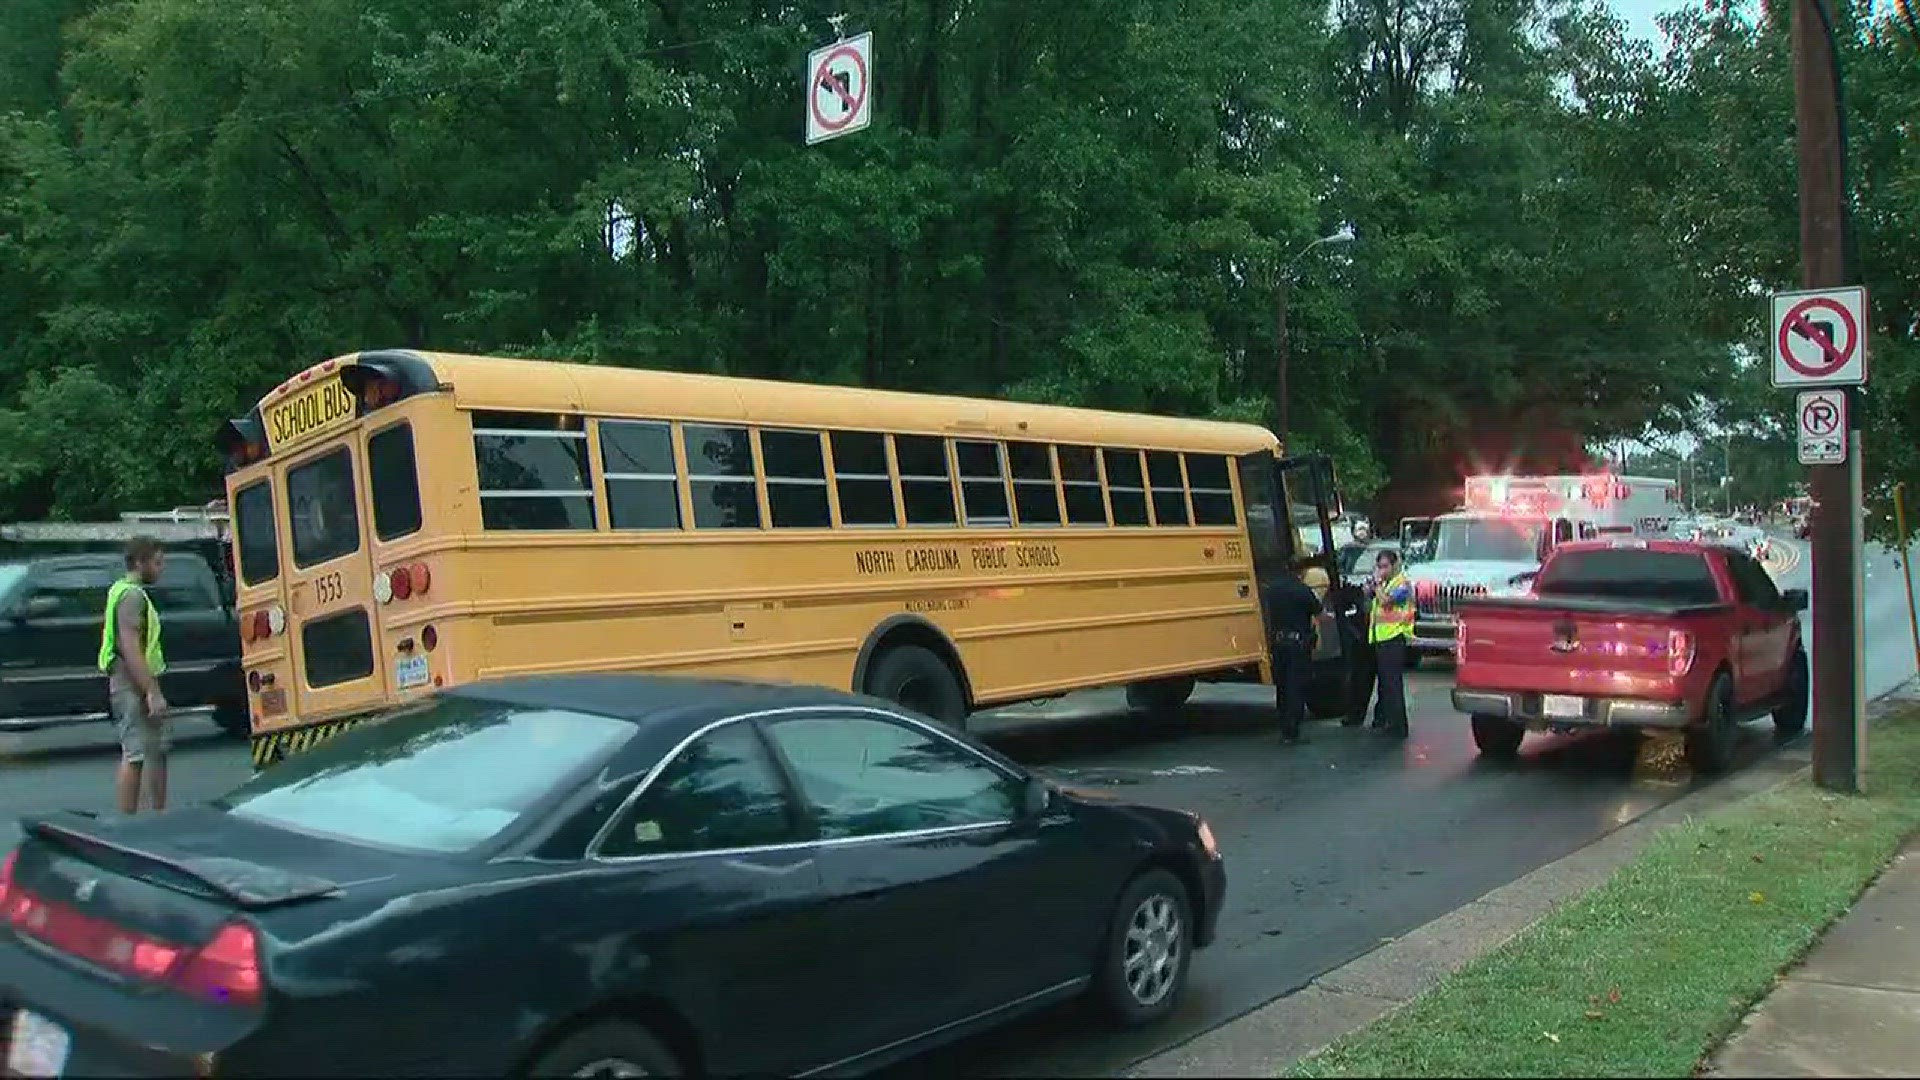 A wheel reportedly came off the bus and smashed the front of a red car.